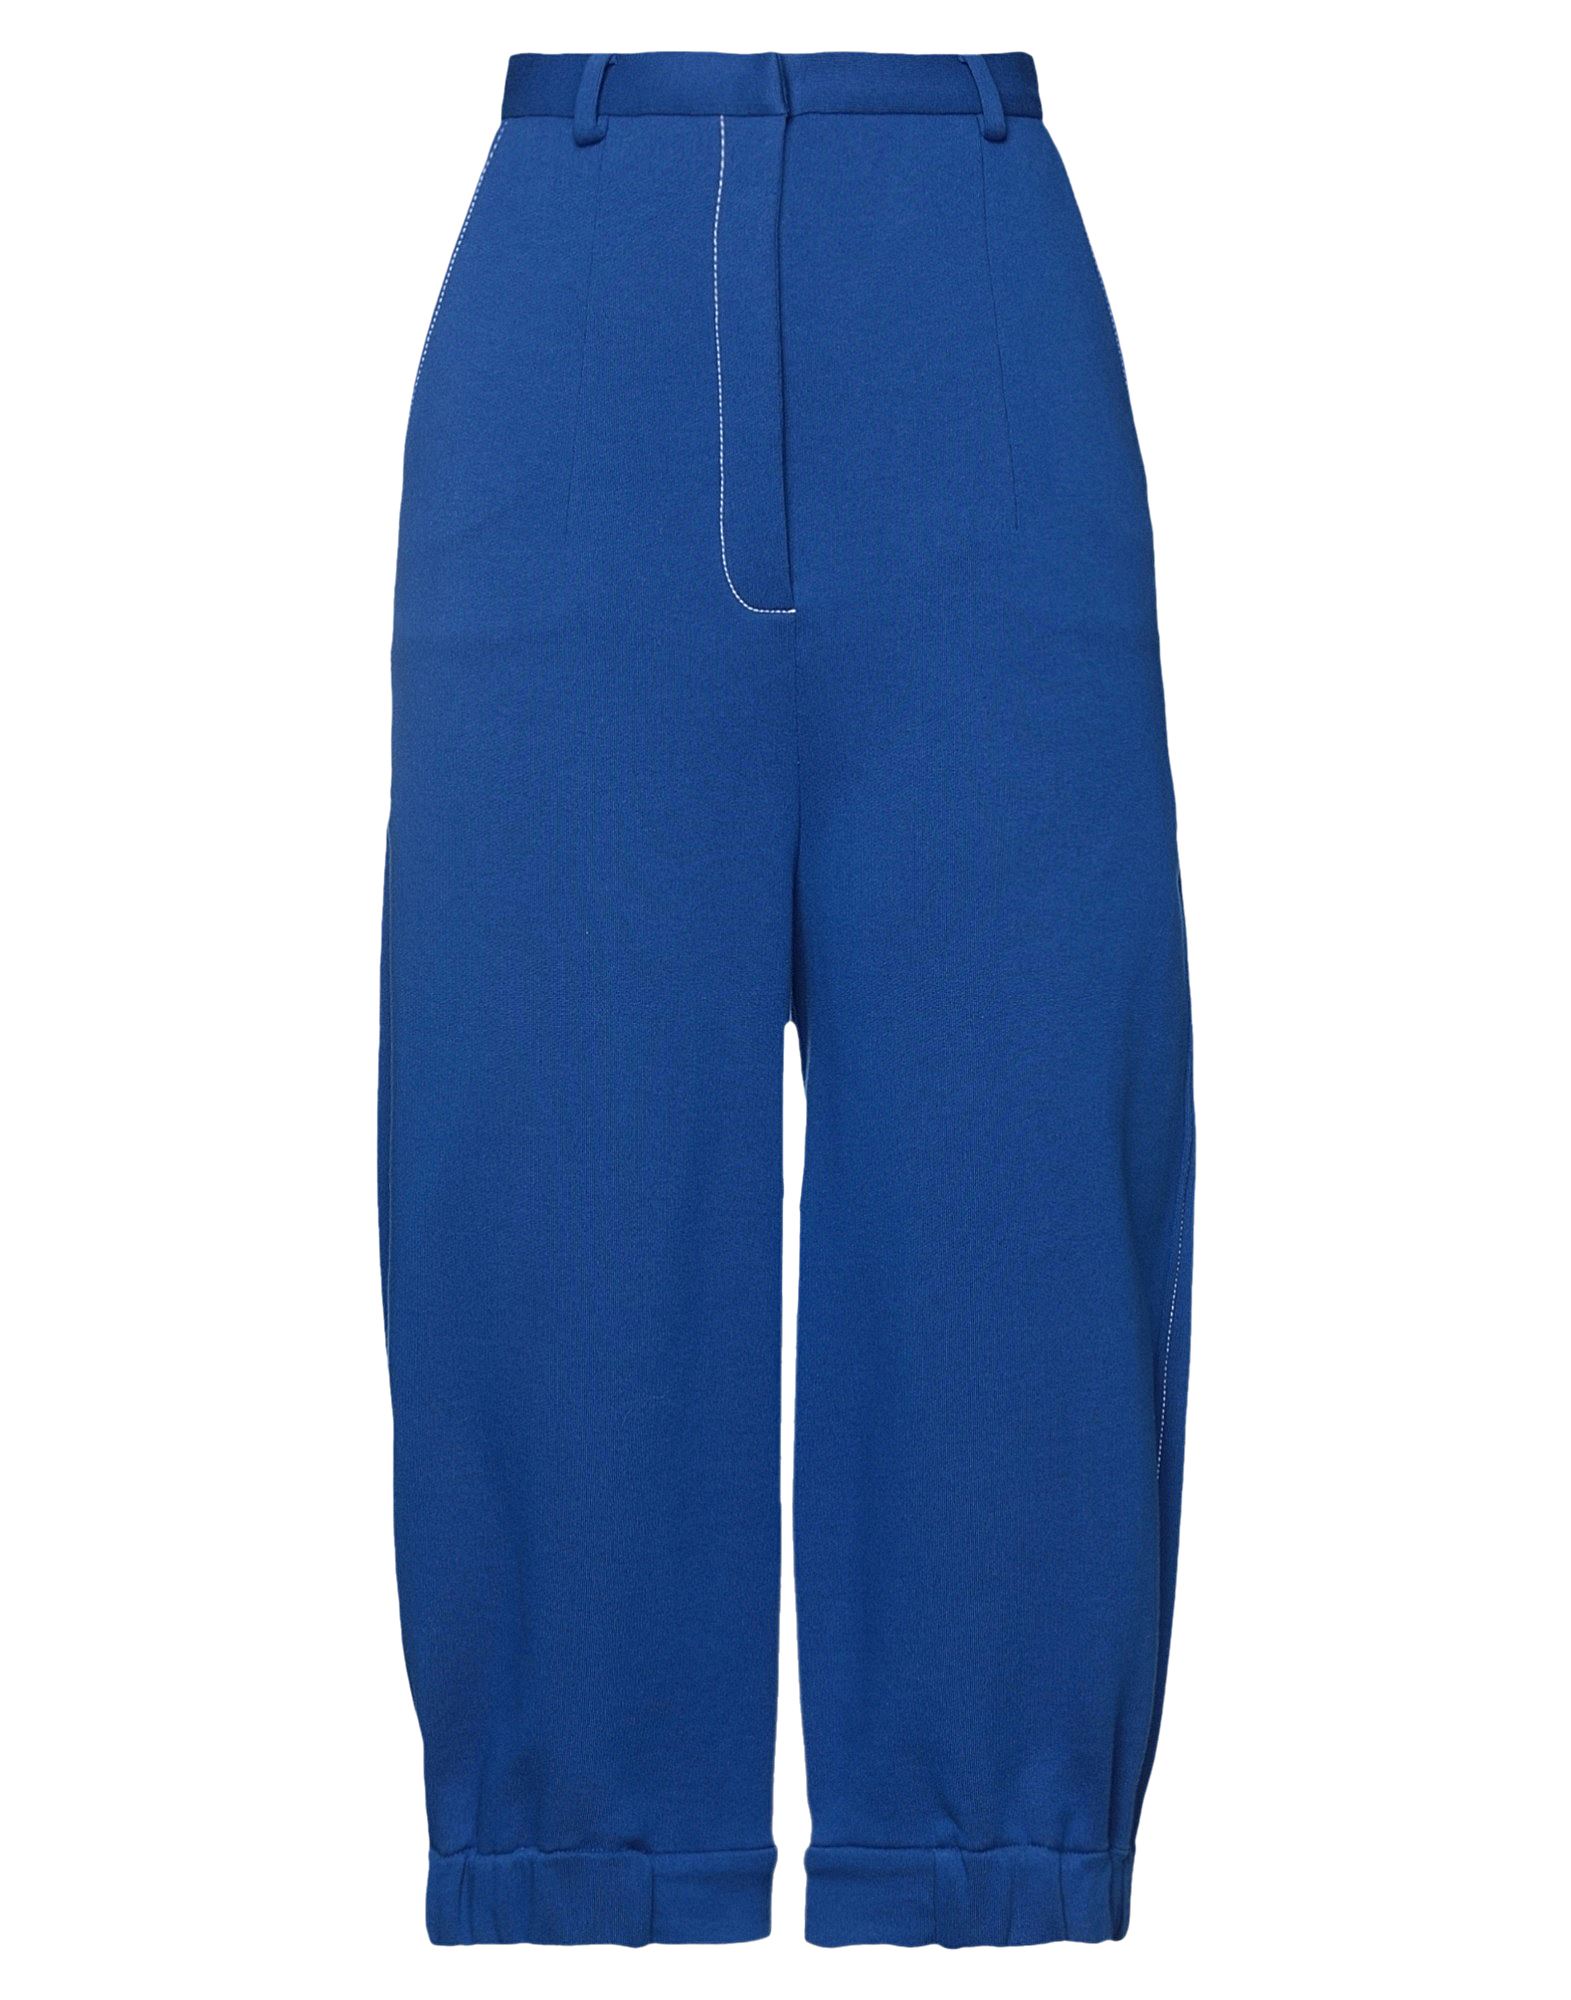 Dependance Cropped Pants In Blue